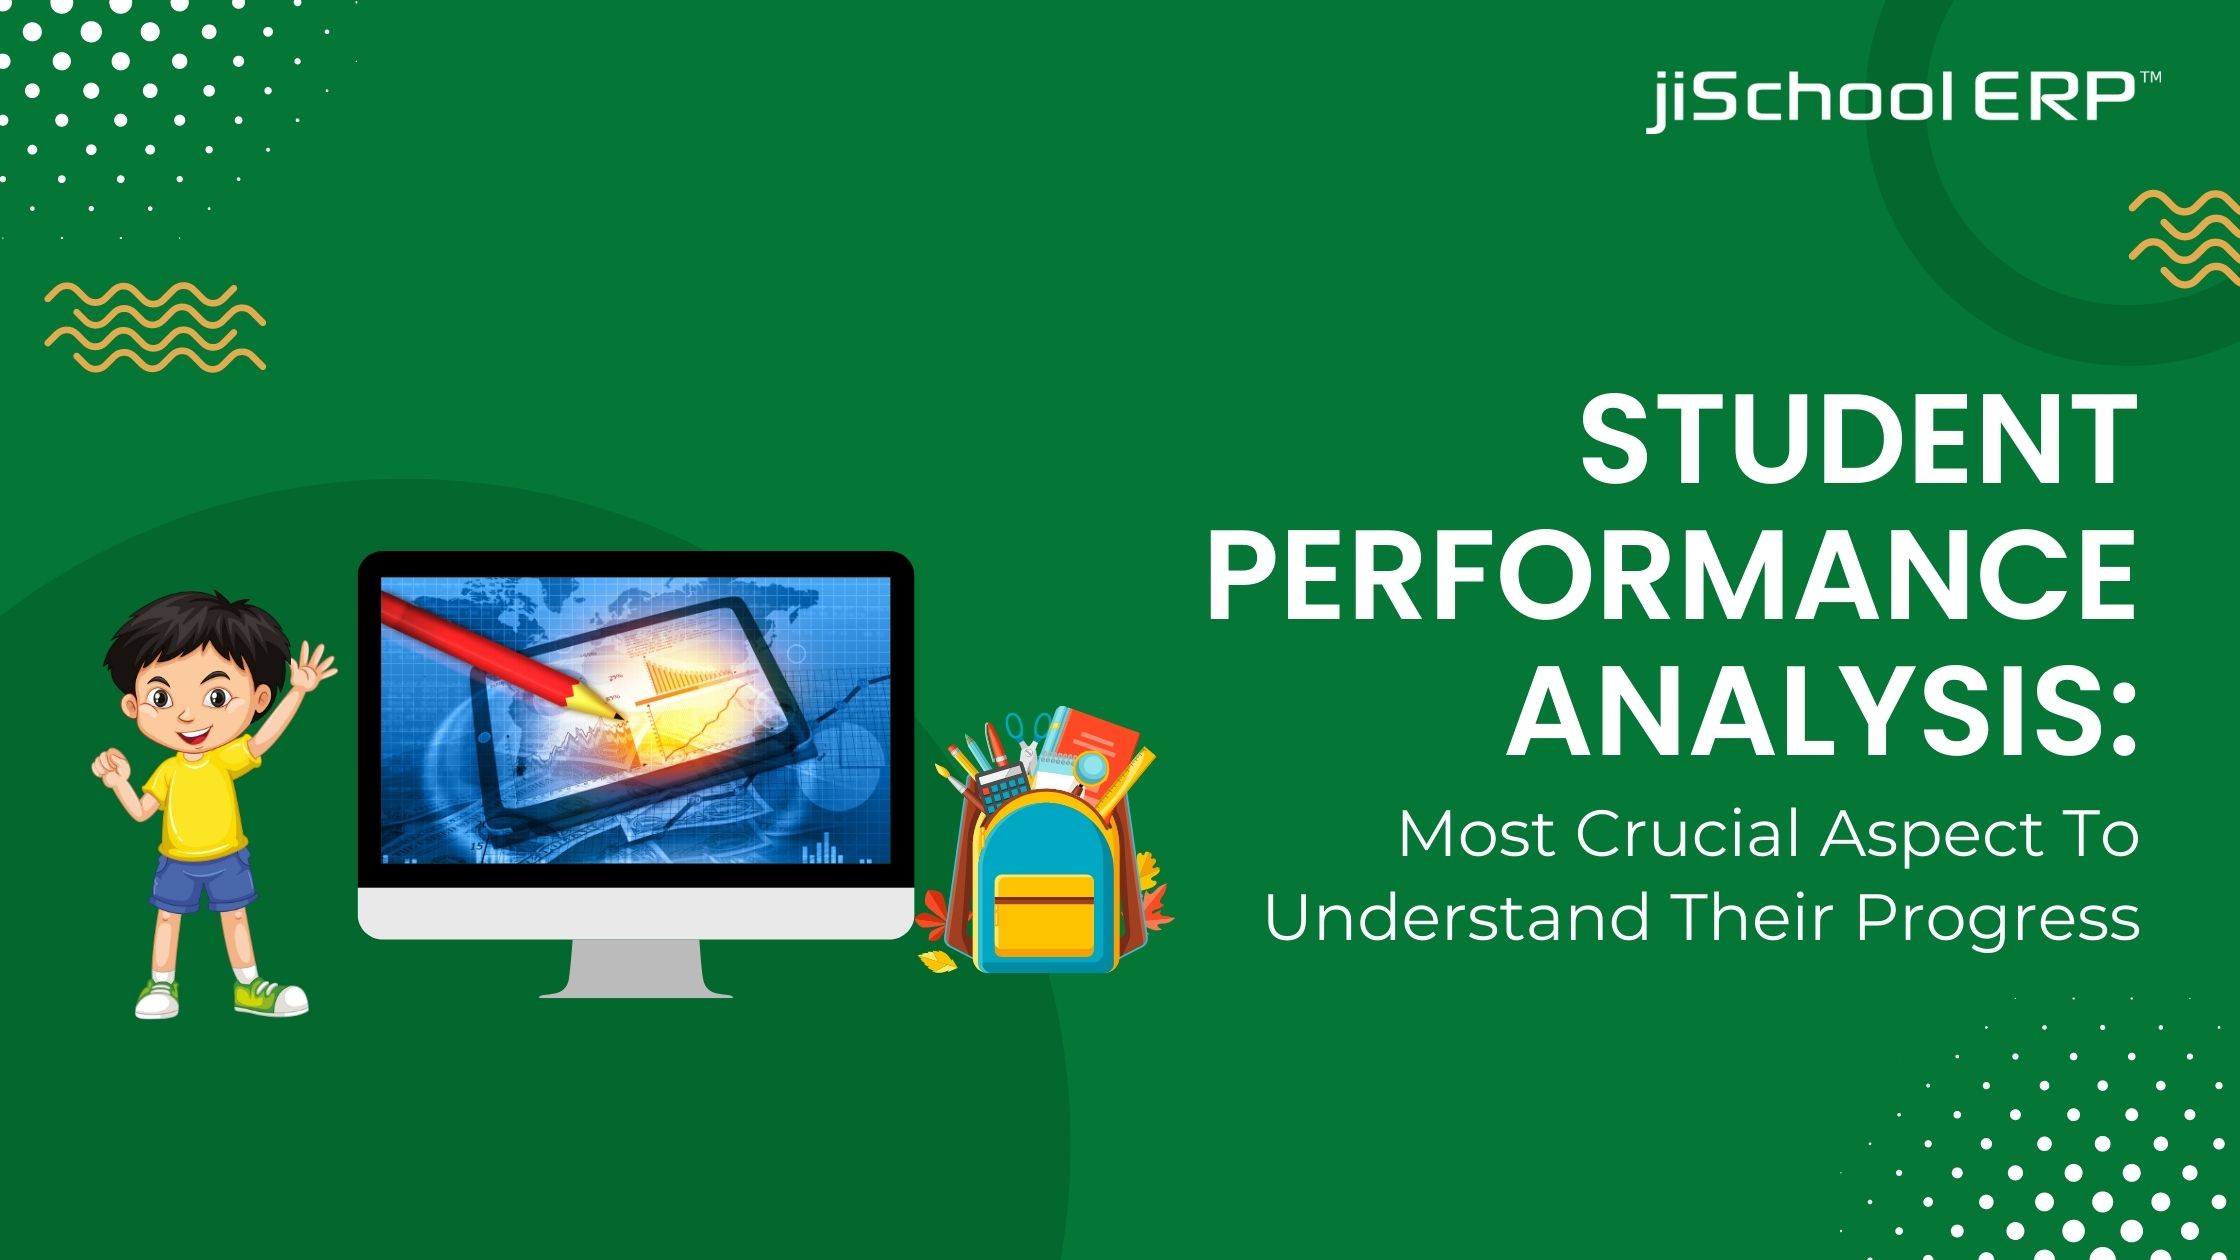 Student Performance Analysis: Most Crucial Aspect To Understand Their Progress